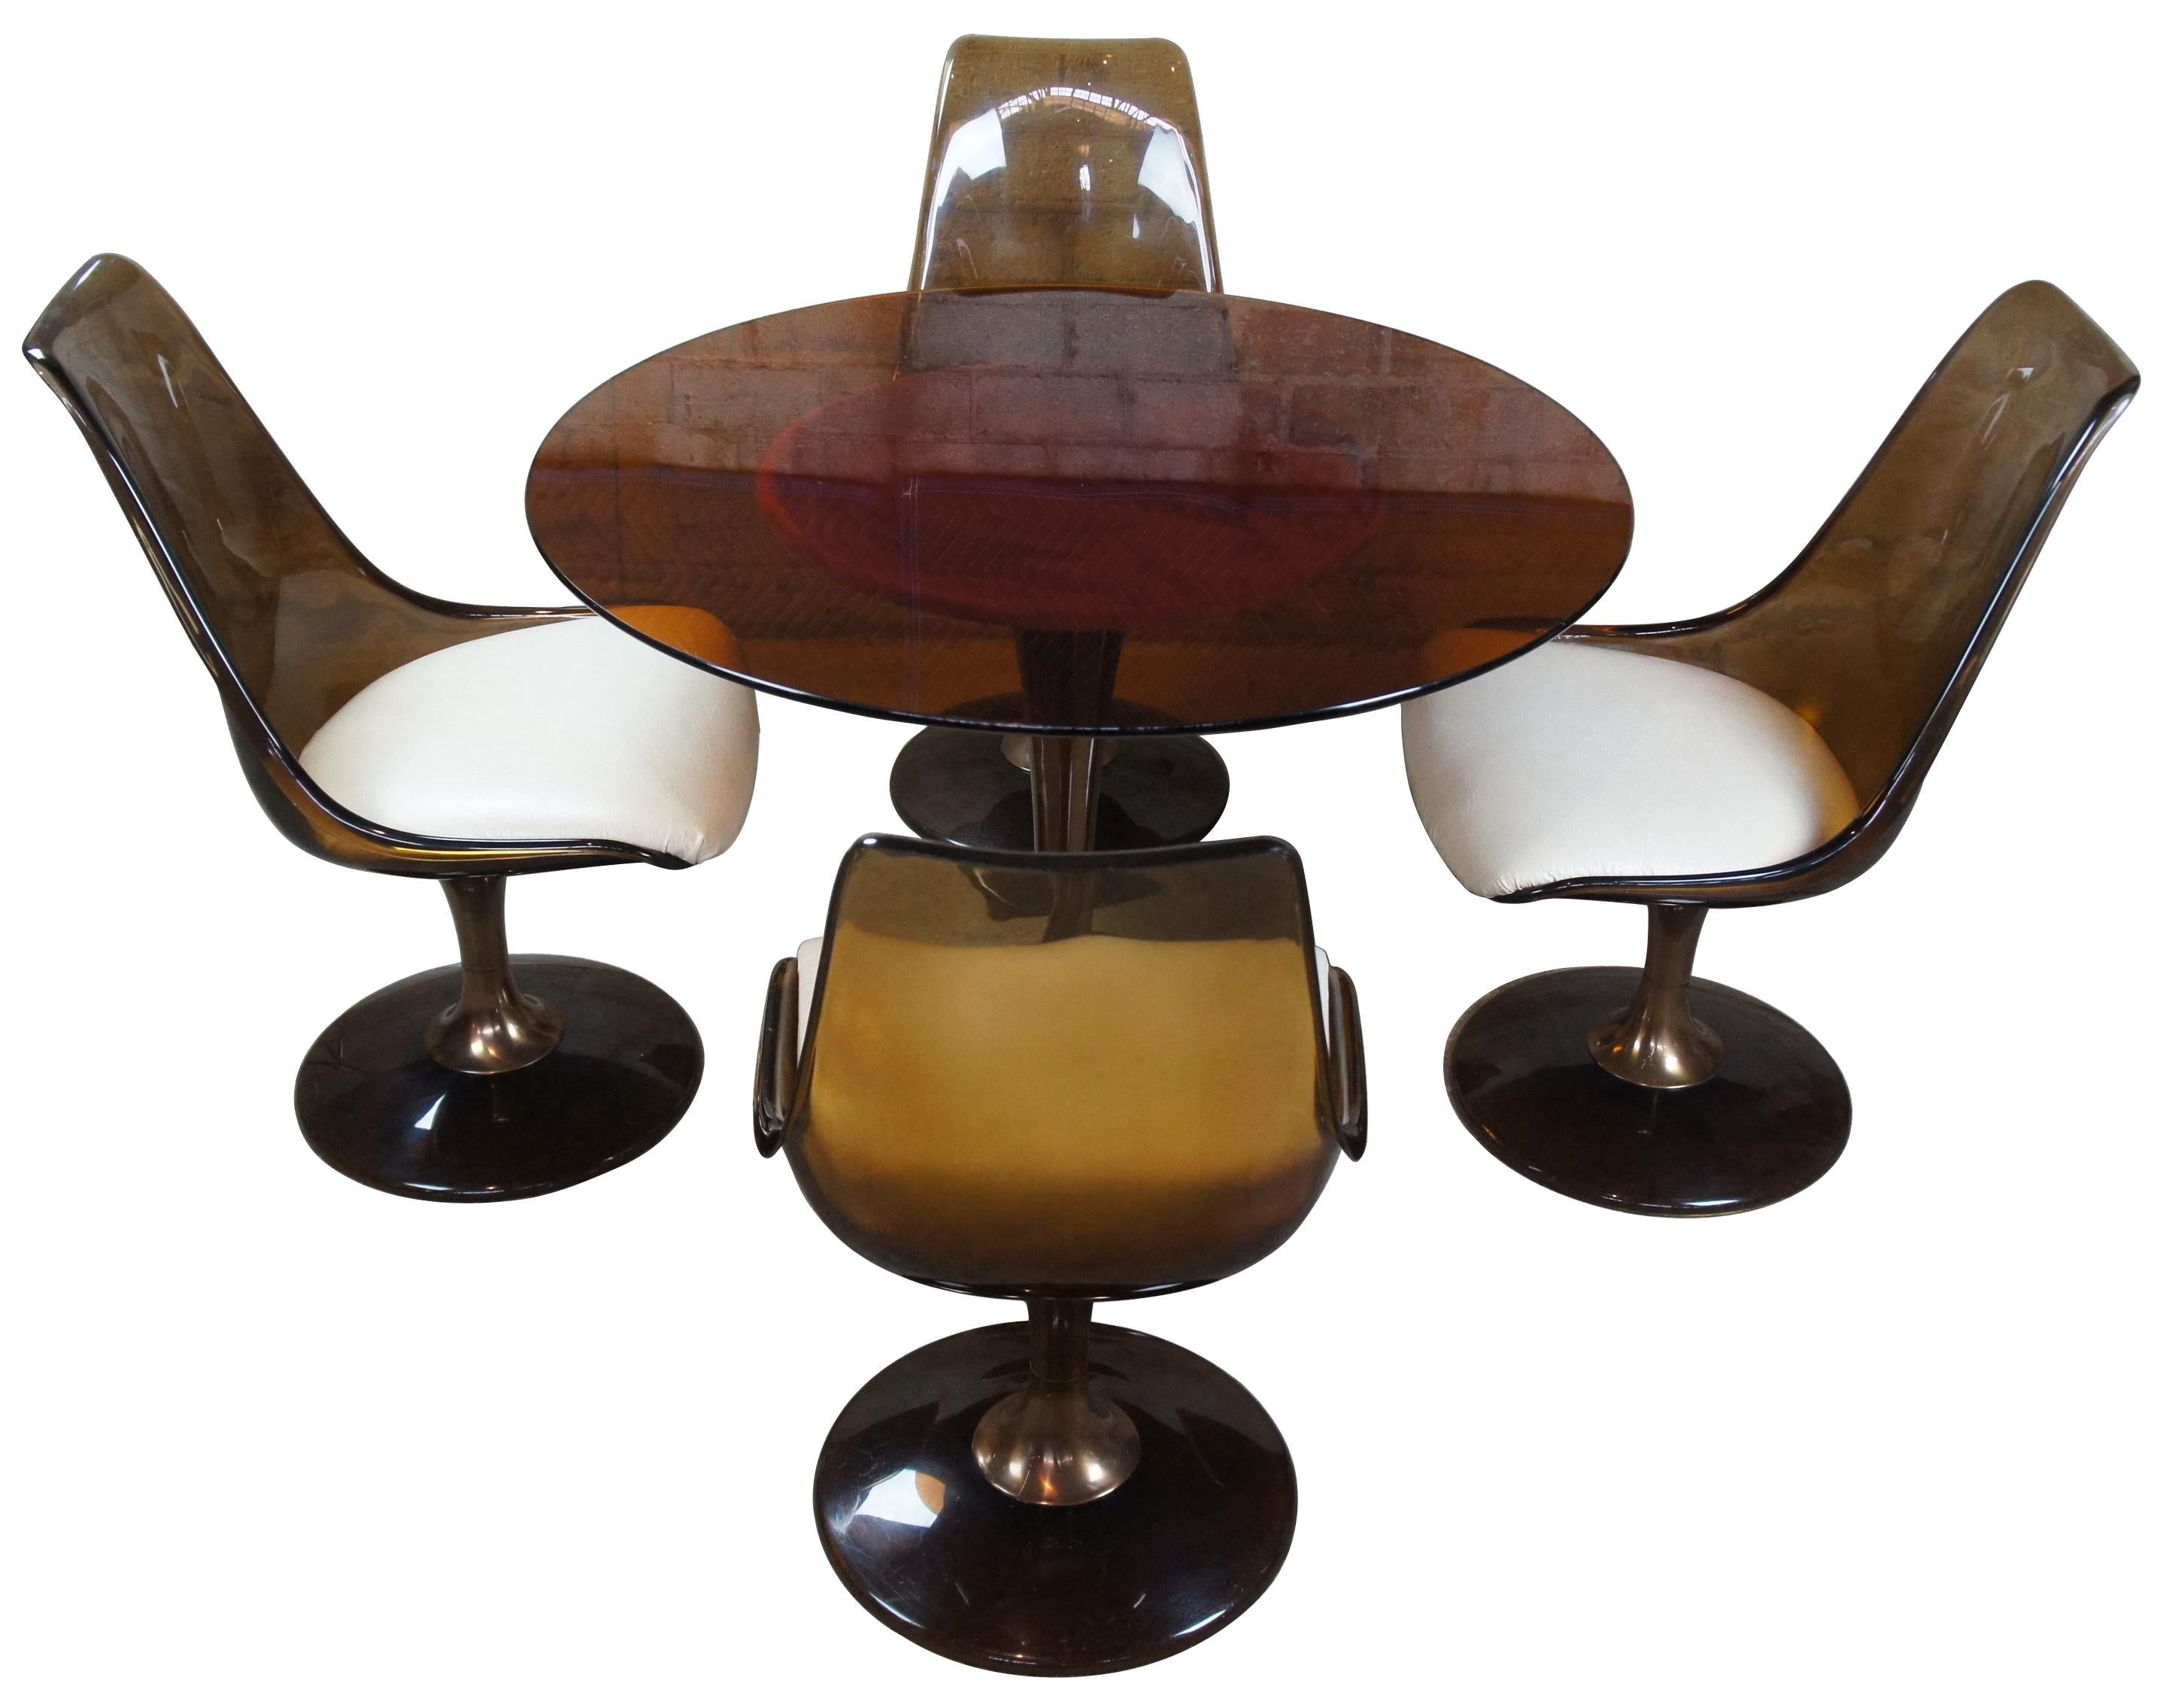 Chromcraft Saarinen smoked Lucite table set, circa 1970s. Features four tulip chairs and amber colored glass top.

Dimensions: Chairs 20